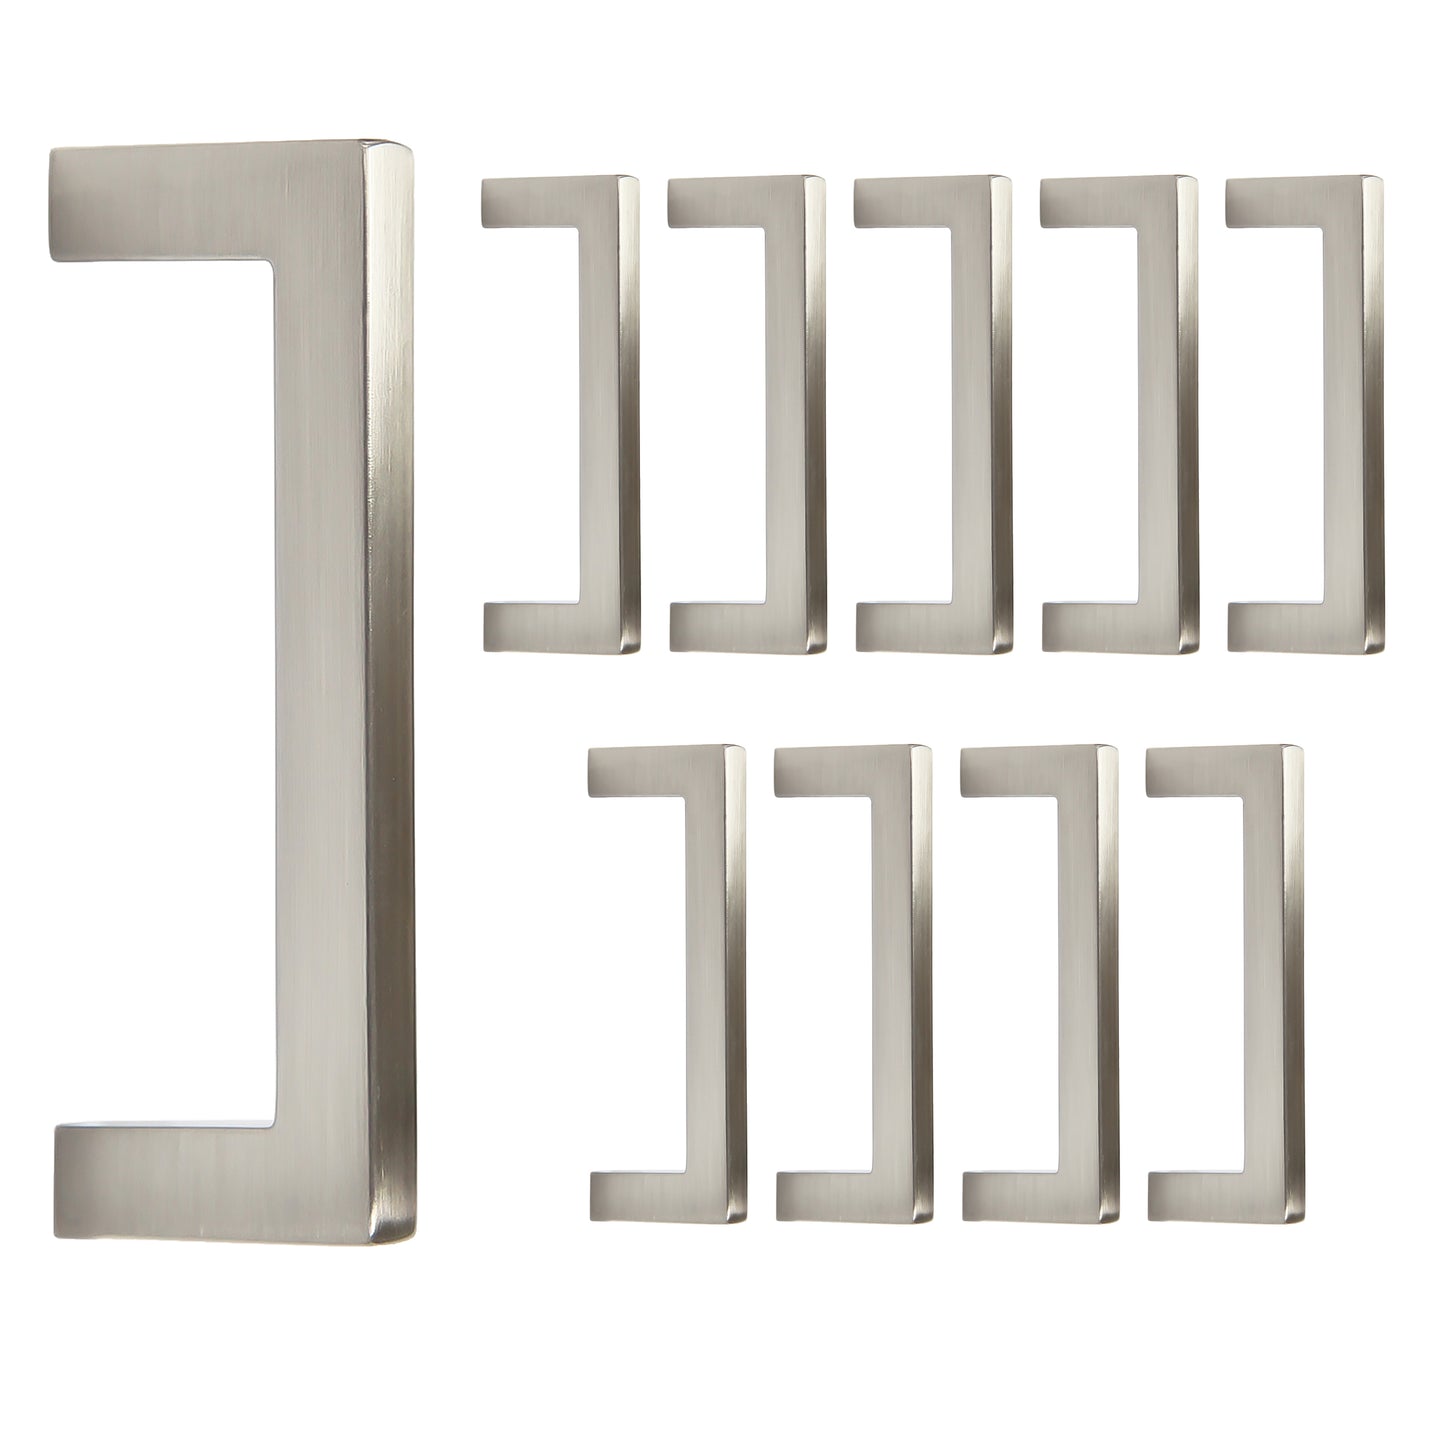 Square Bar 3 in. (76mm) Drawer Pull (10-Pack)